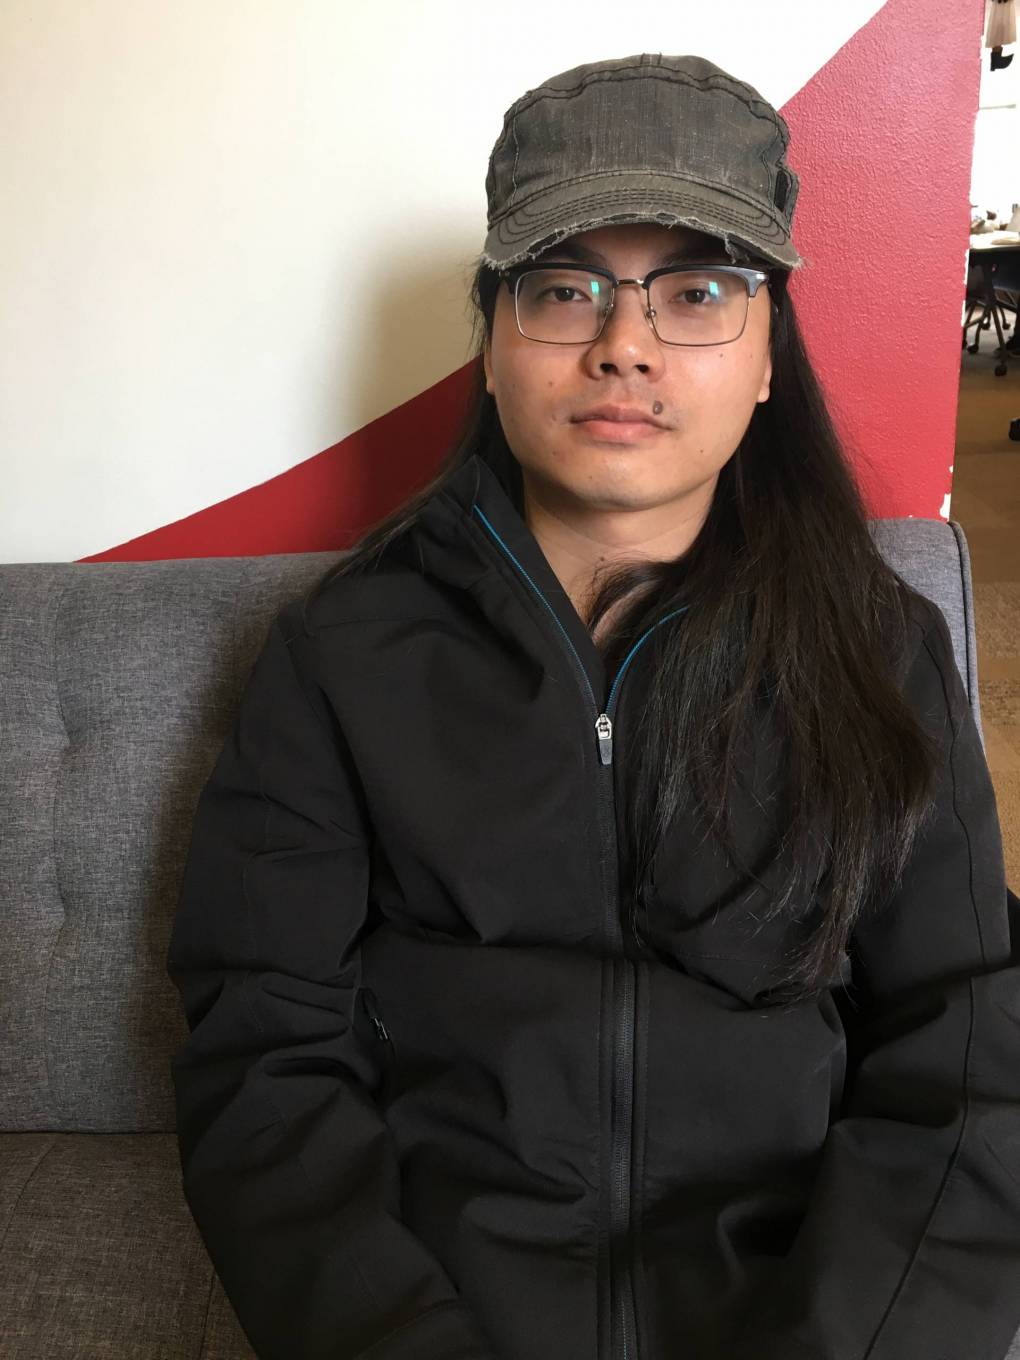 Ping Tam, 29, testified against his former employers at a hearing at the Labor Commissioner's Office.